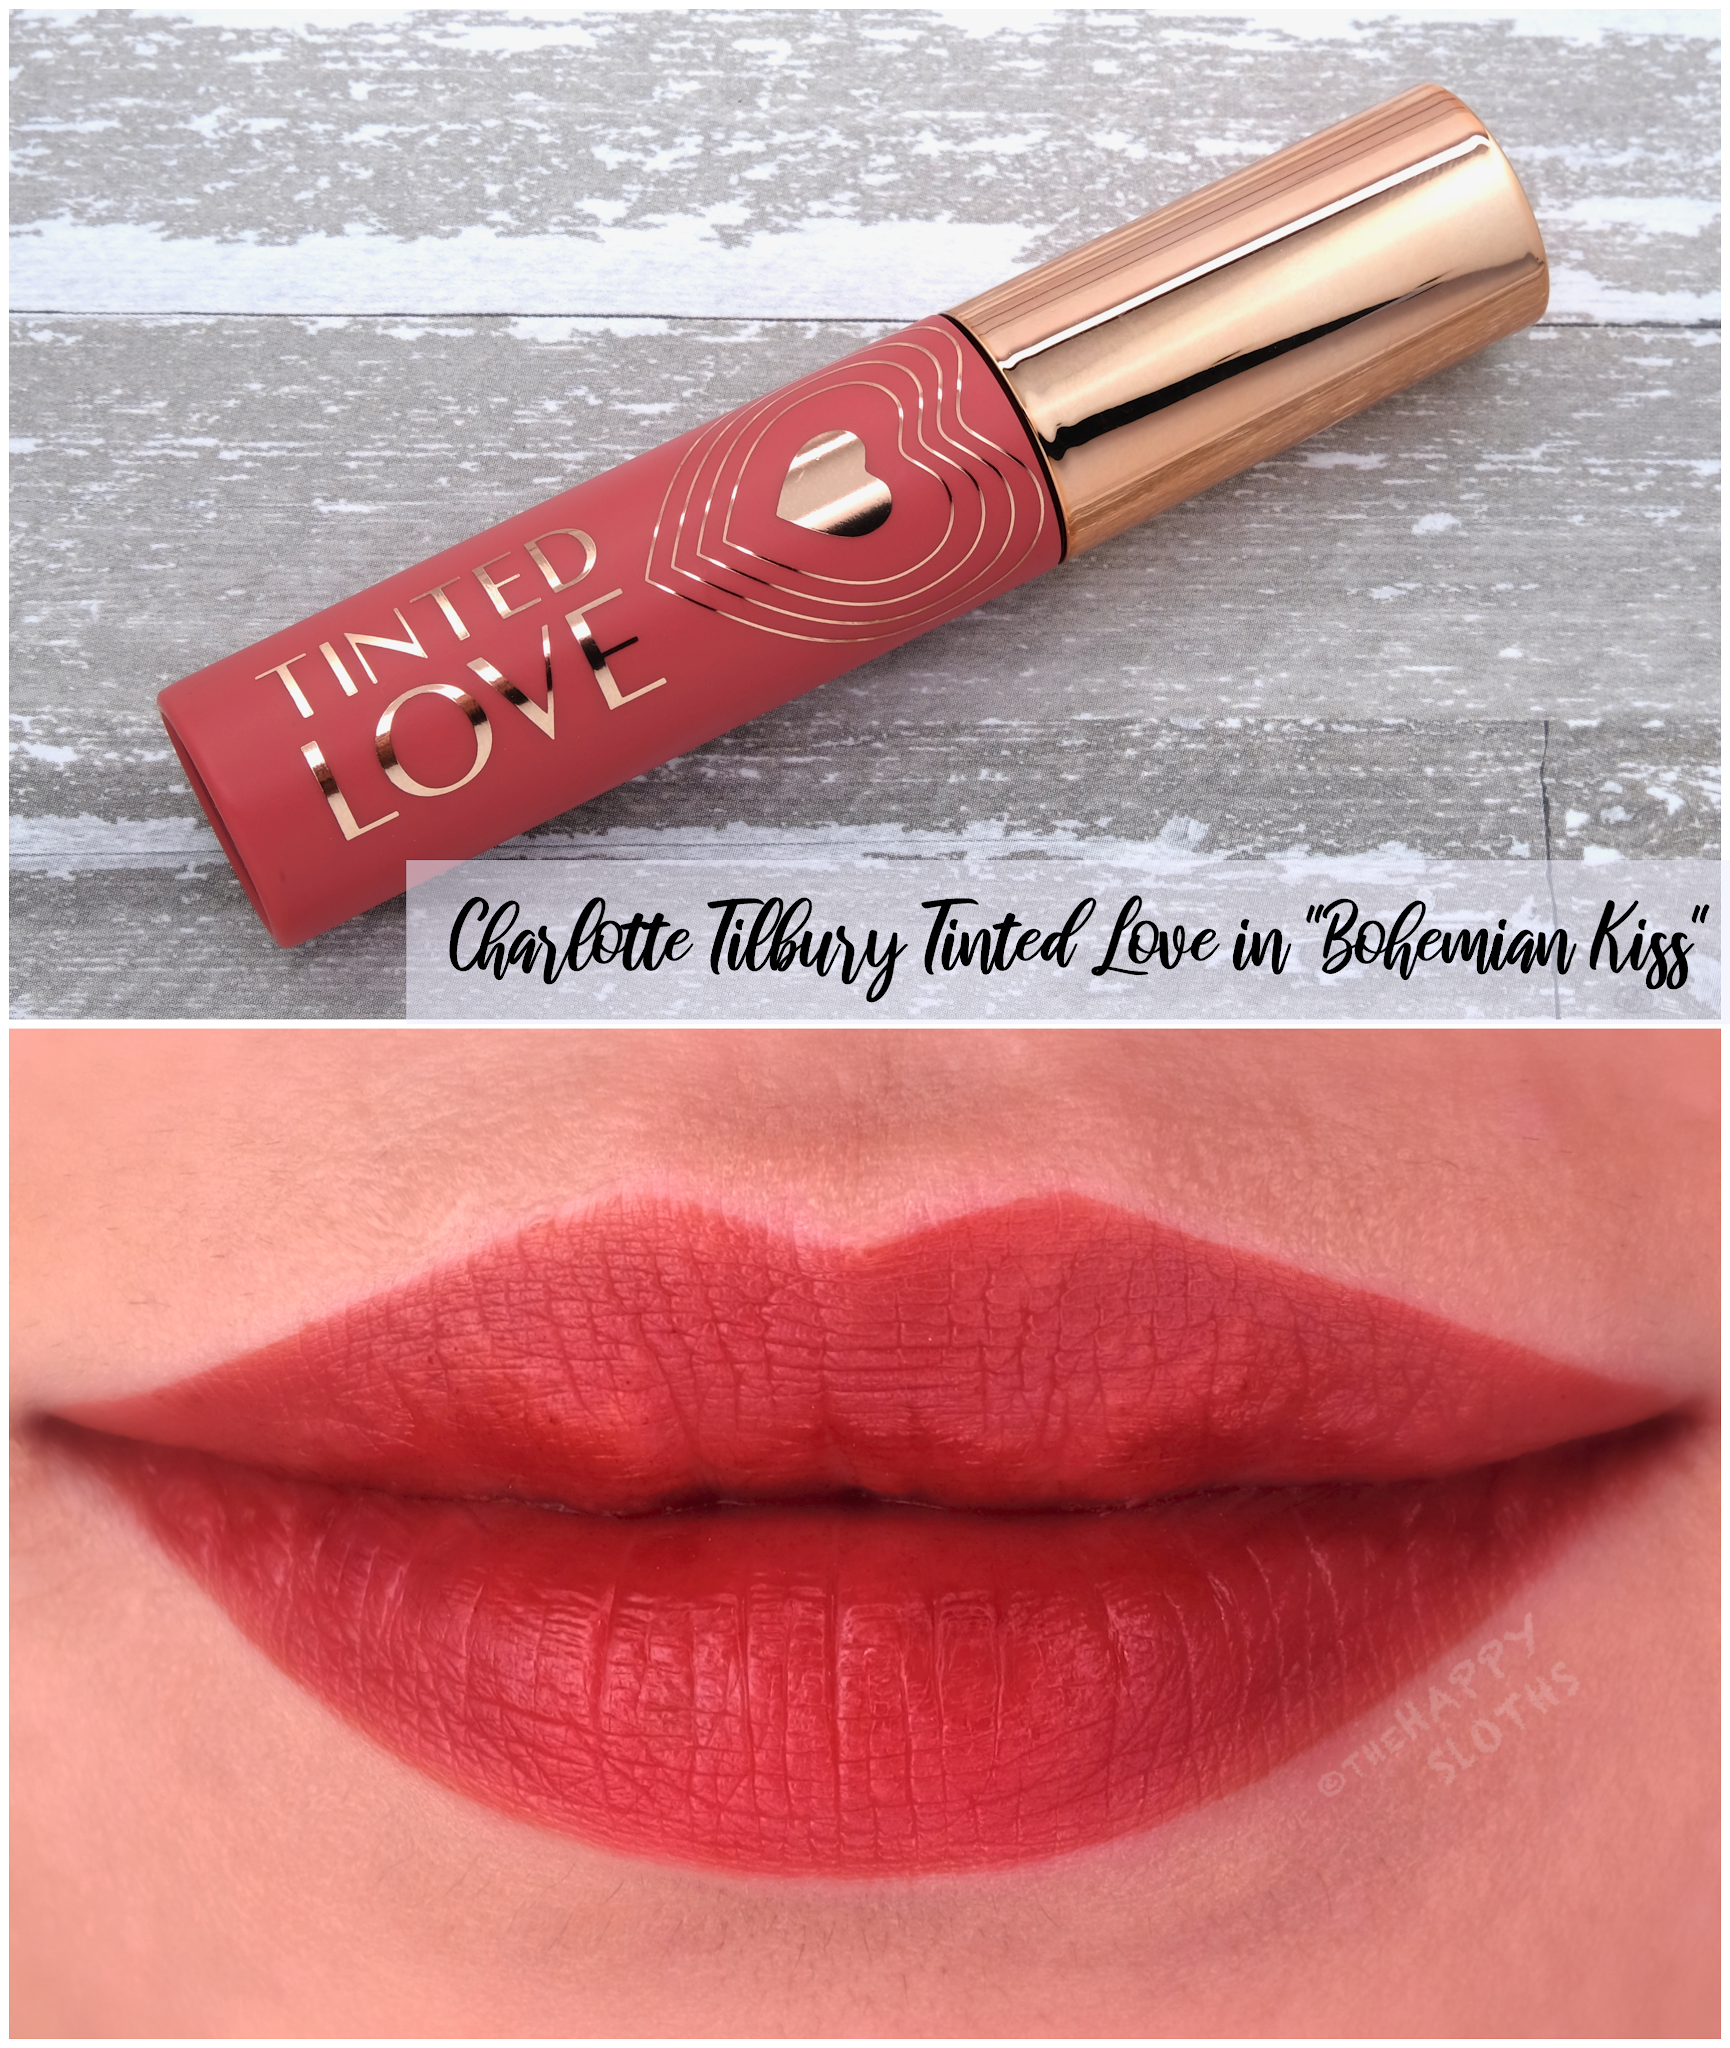 Charlotte Tilbury | Tinted Love Lip & Cheek Tint in "Bohemian Kiss": Review and Swatches